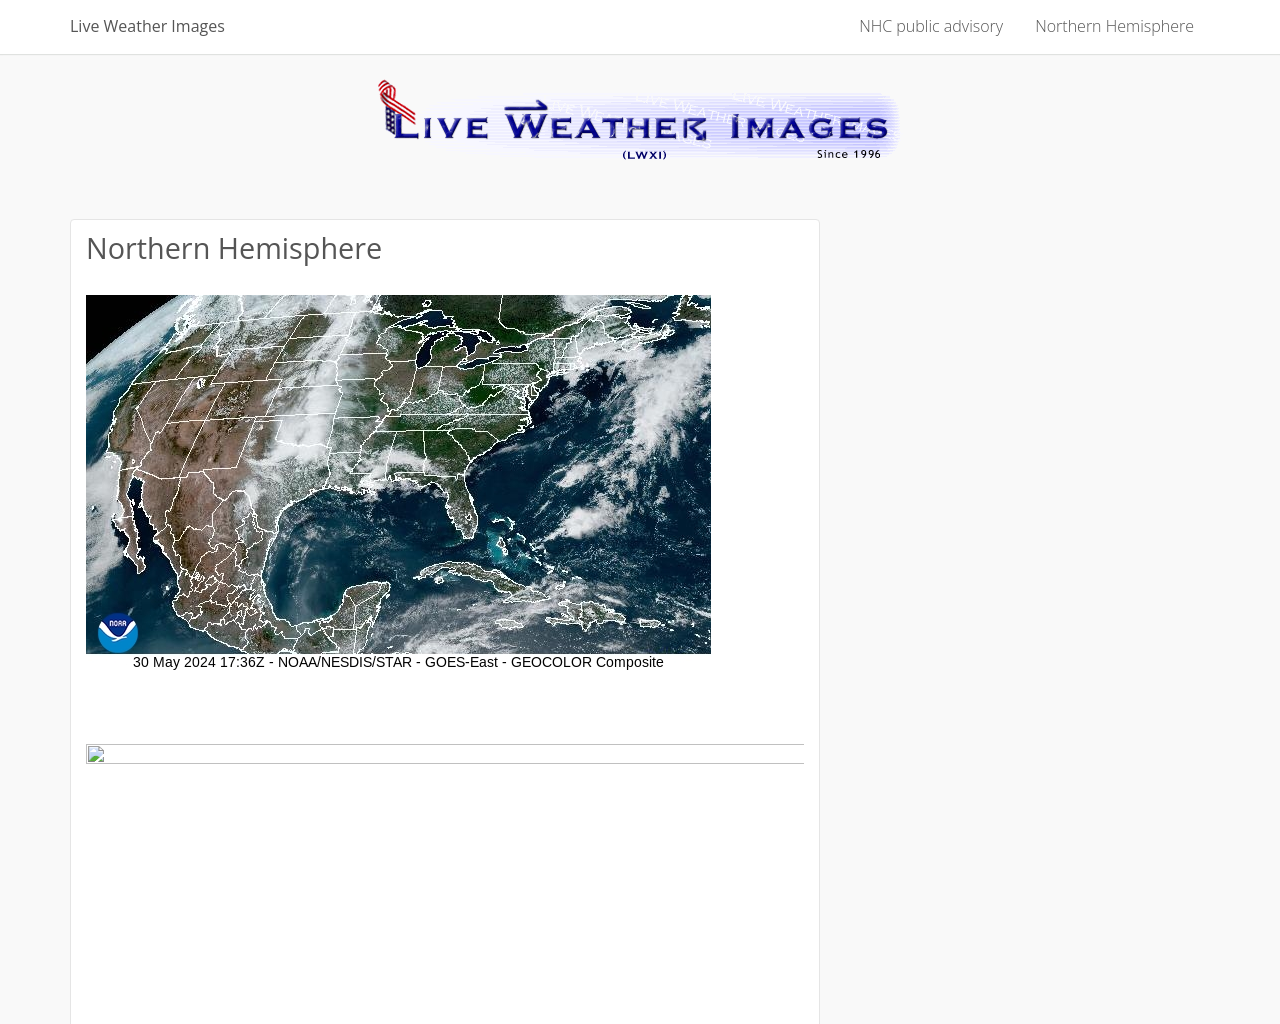 weatherimages.org